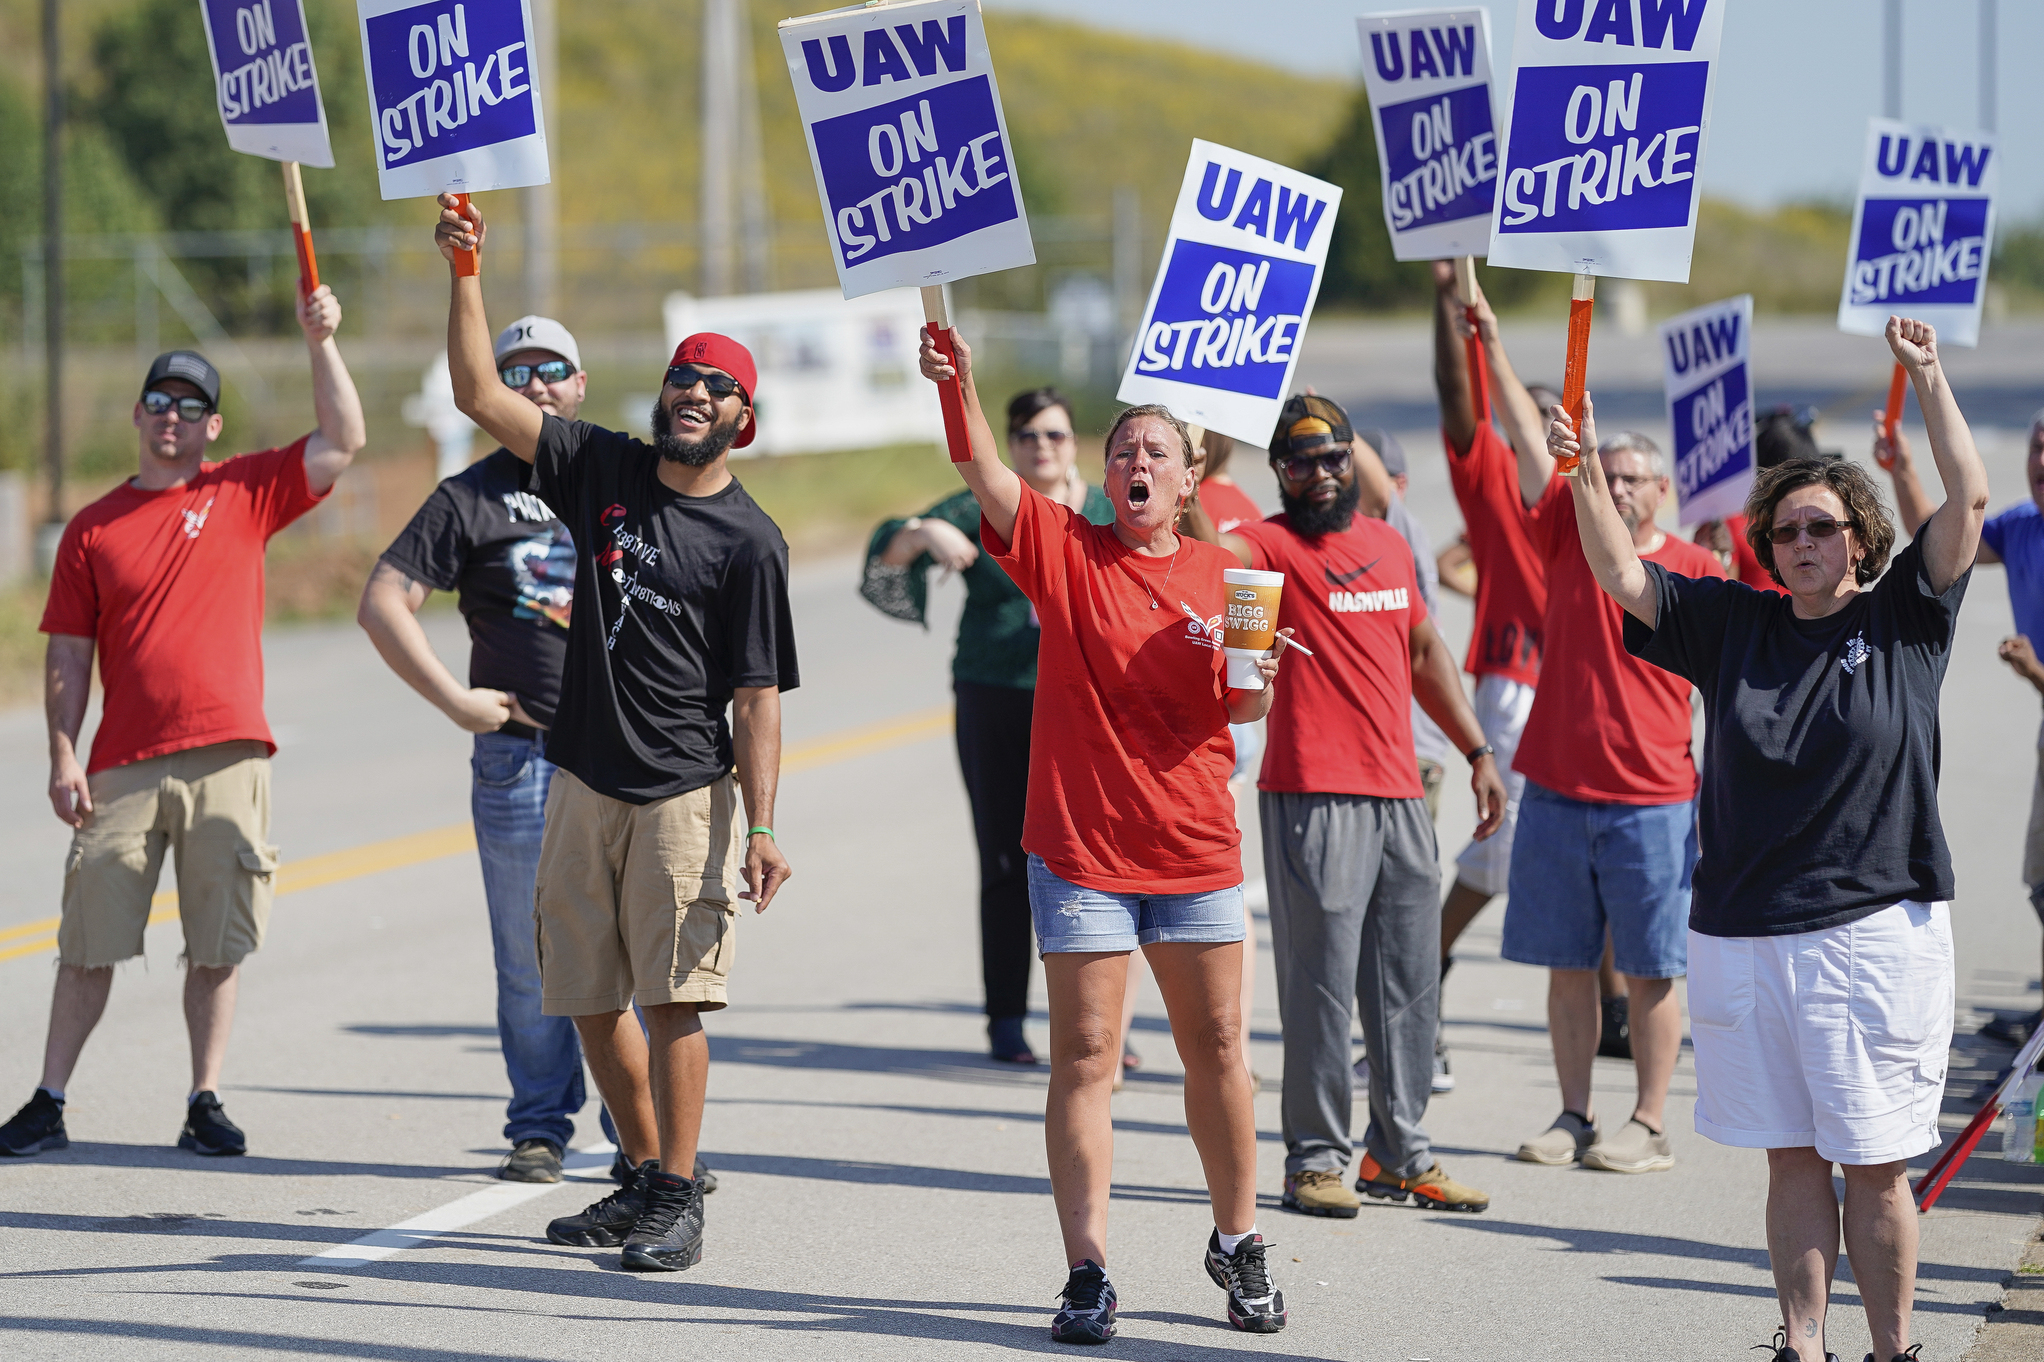 Wisconsin GM Workers Part Of Nationwide Strike